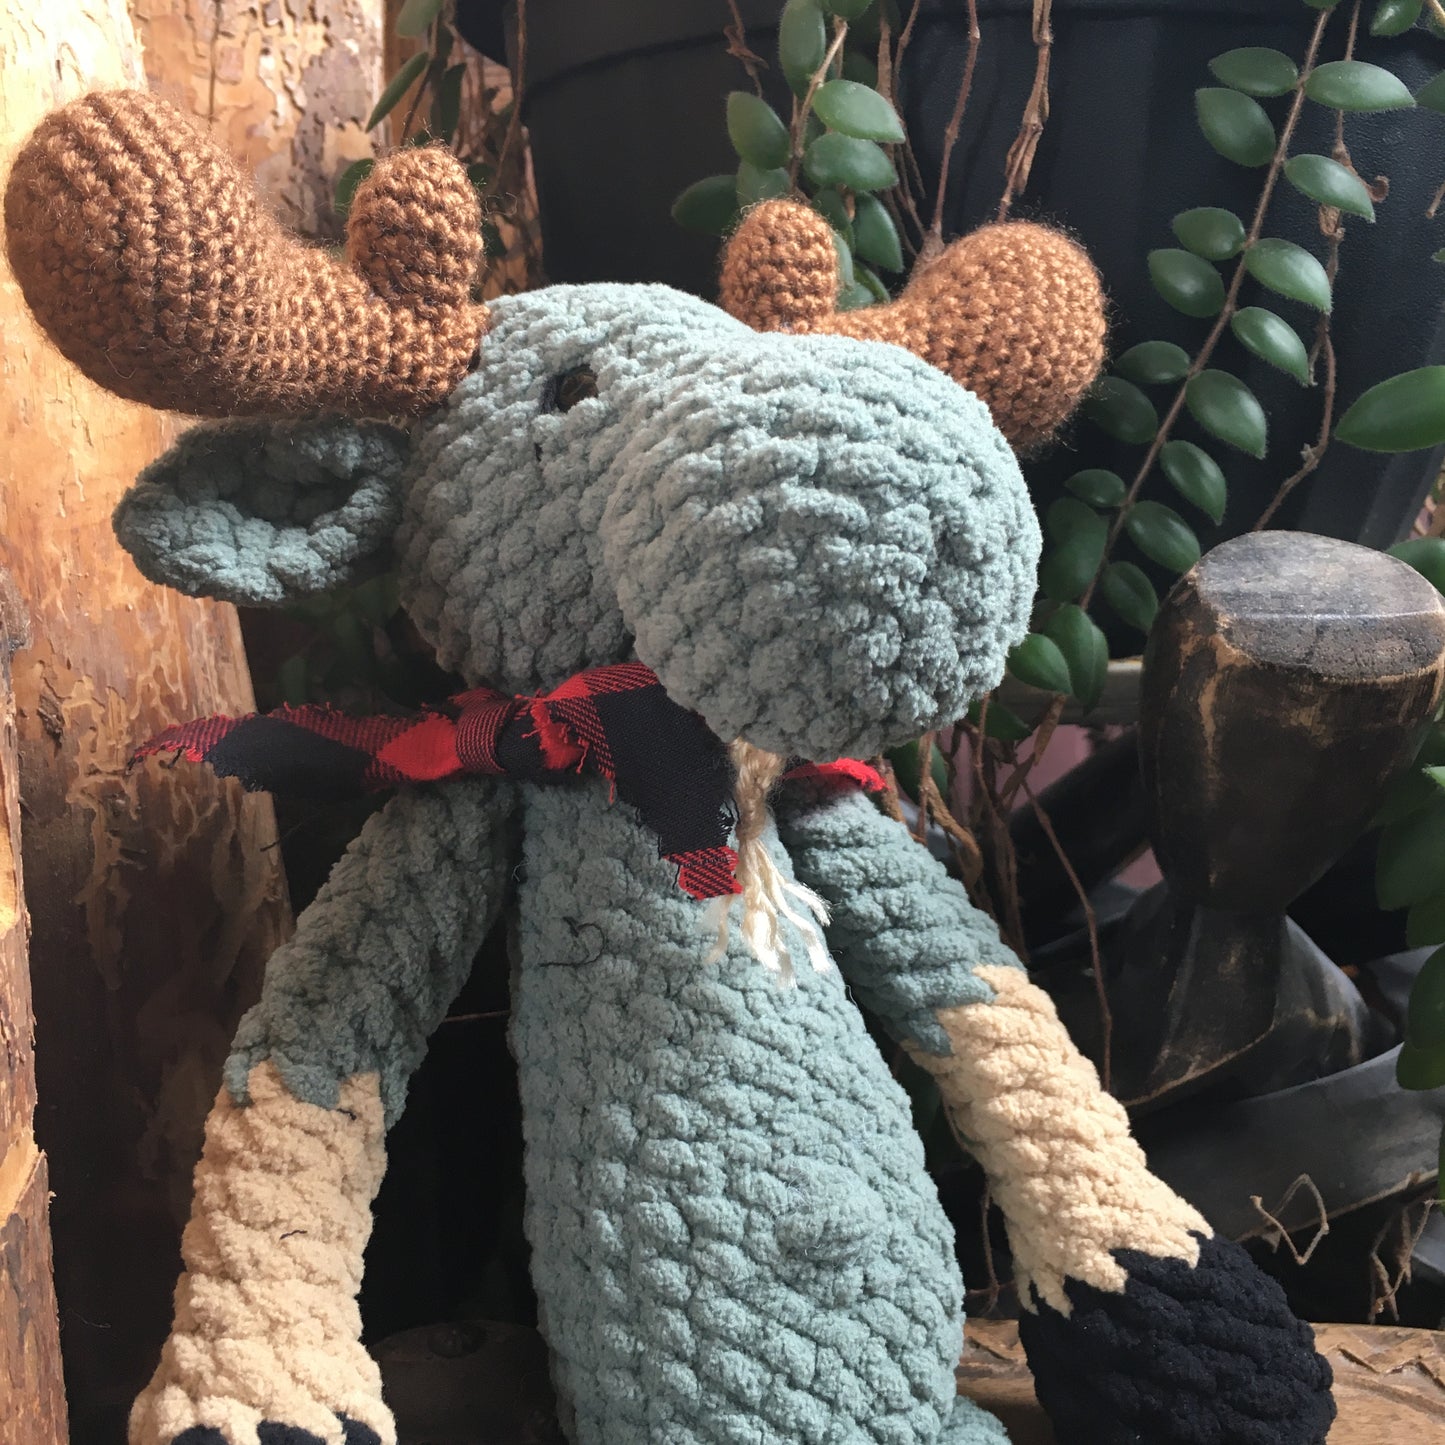 Jack the MOOMOOSE (NONORIGNAL) smoked green color, with safe eyes, lumberjack style moose soft toy, Can be personalized in BIRTH plushies